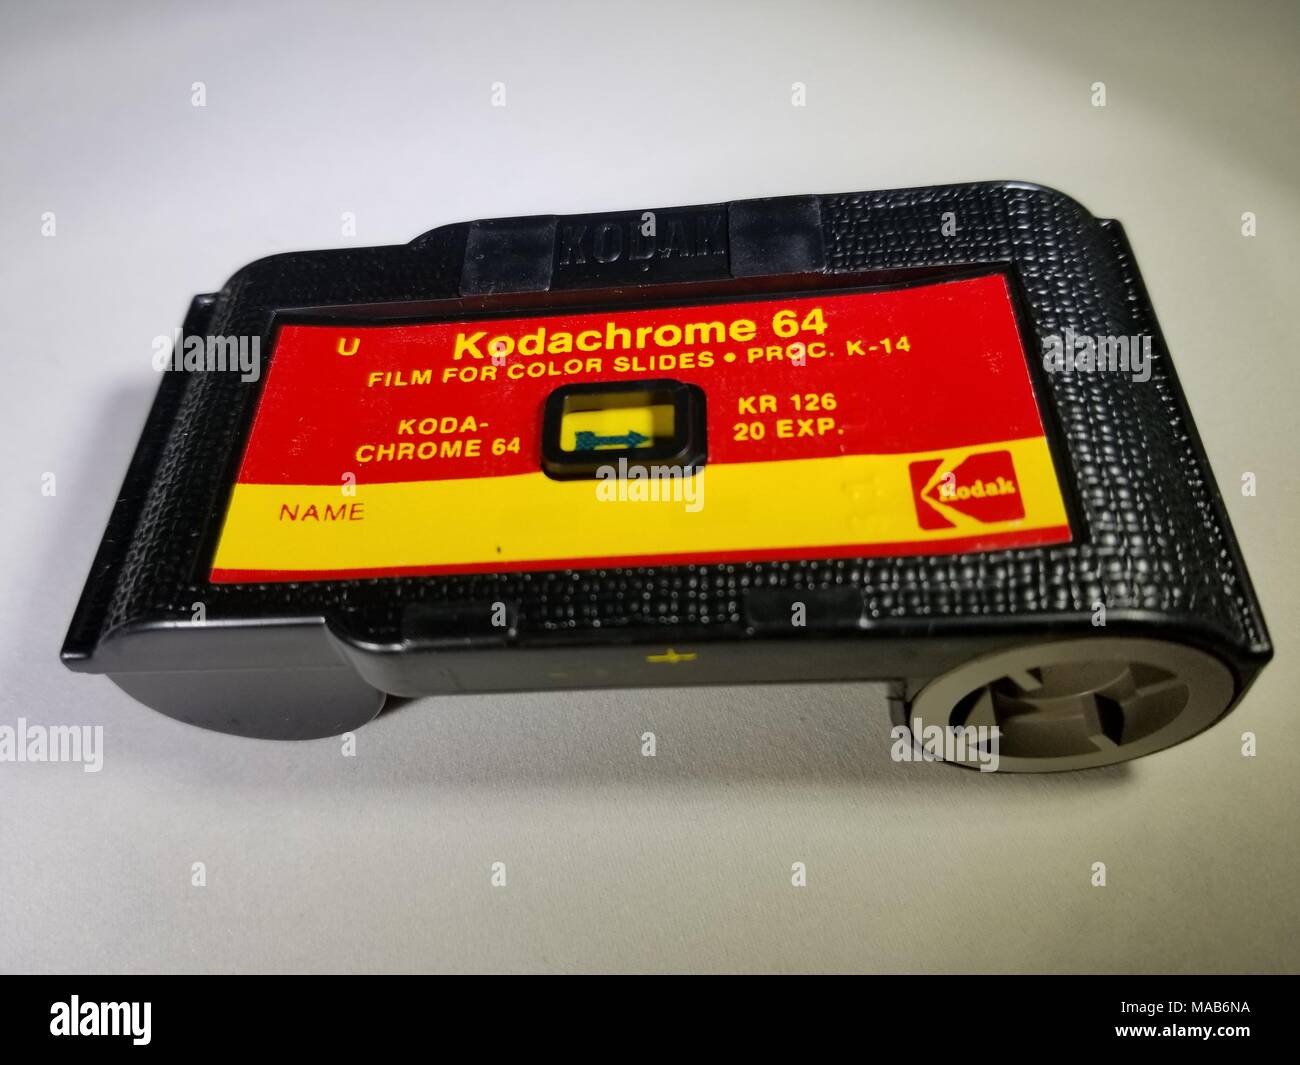 Close-up of Kodak 126 film cartridge containing Kodachrome 64 film, a classic color reversal slide film, used in 1960s and 1970s era Instamatic cameras, February 22, 2018. () Stock Photo